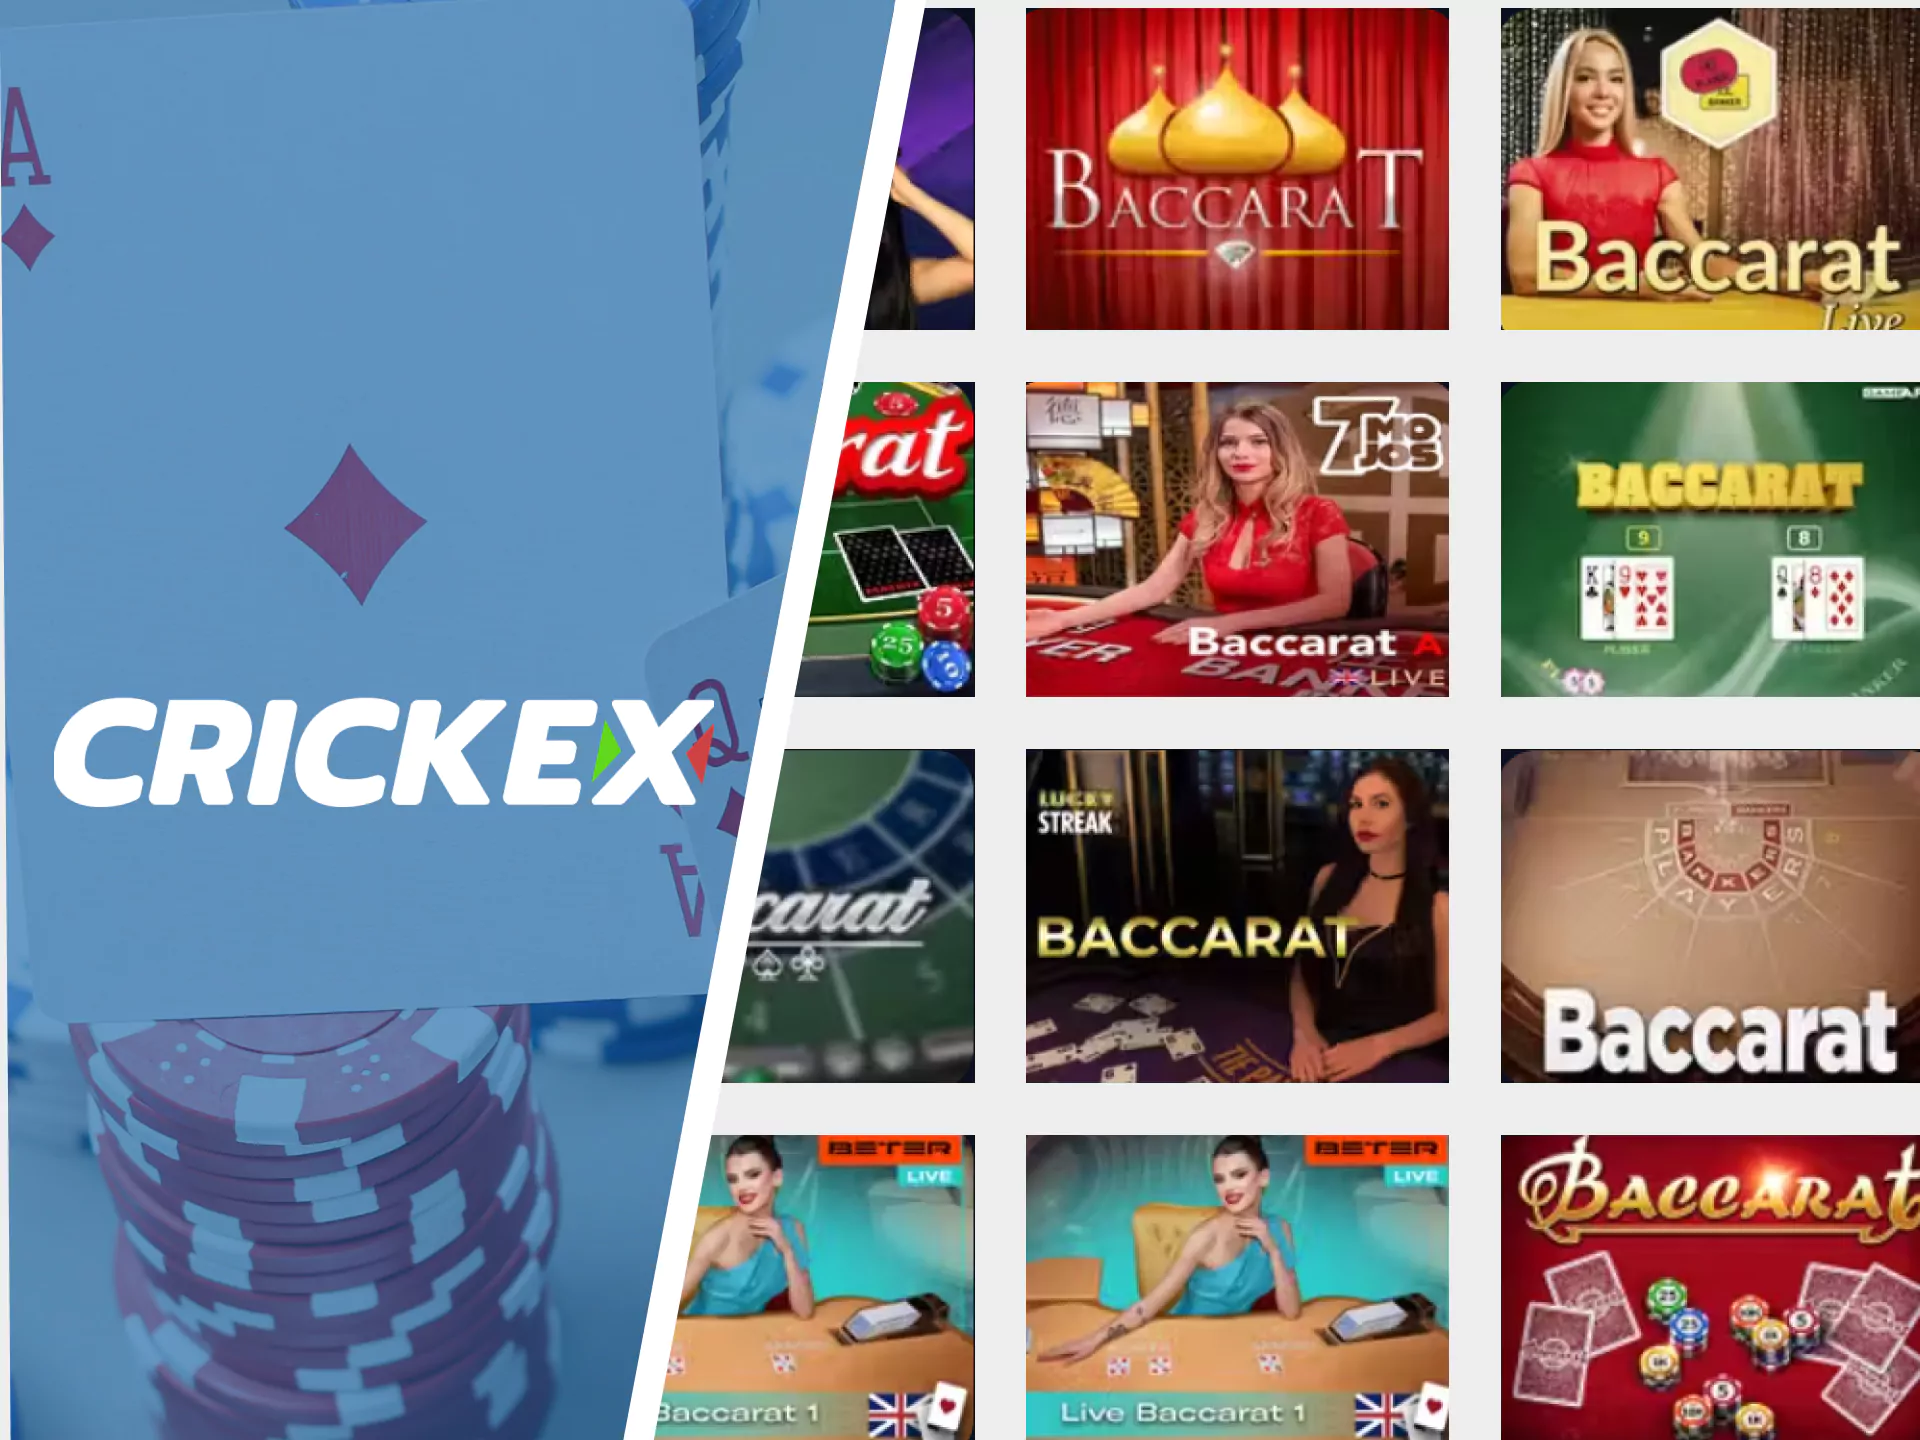 For casino games, choose baccarat from Crickex.